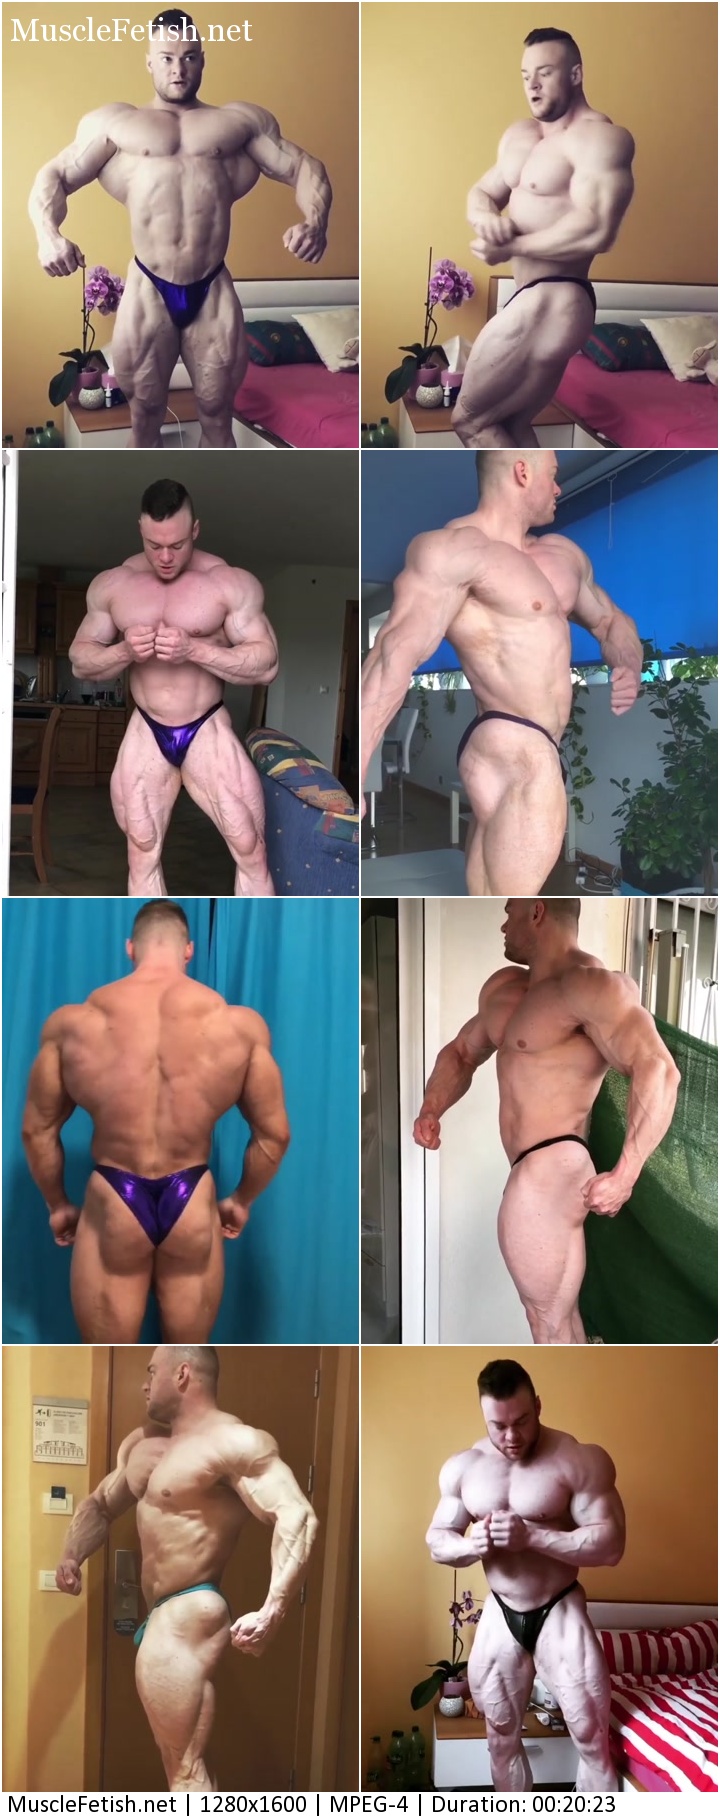 IFBB Pro video - German athlete Ronny Rockel posing and flexing for the camera